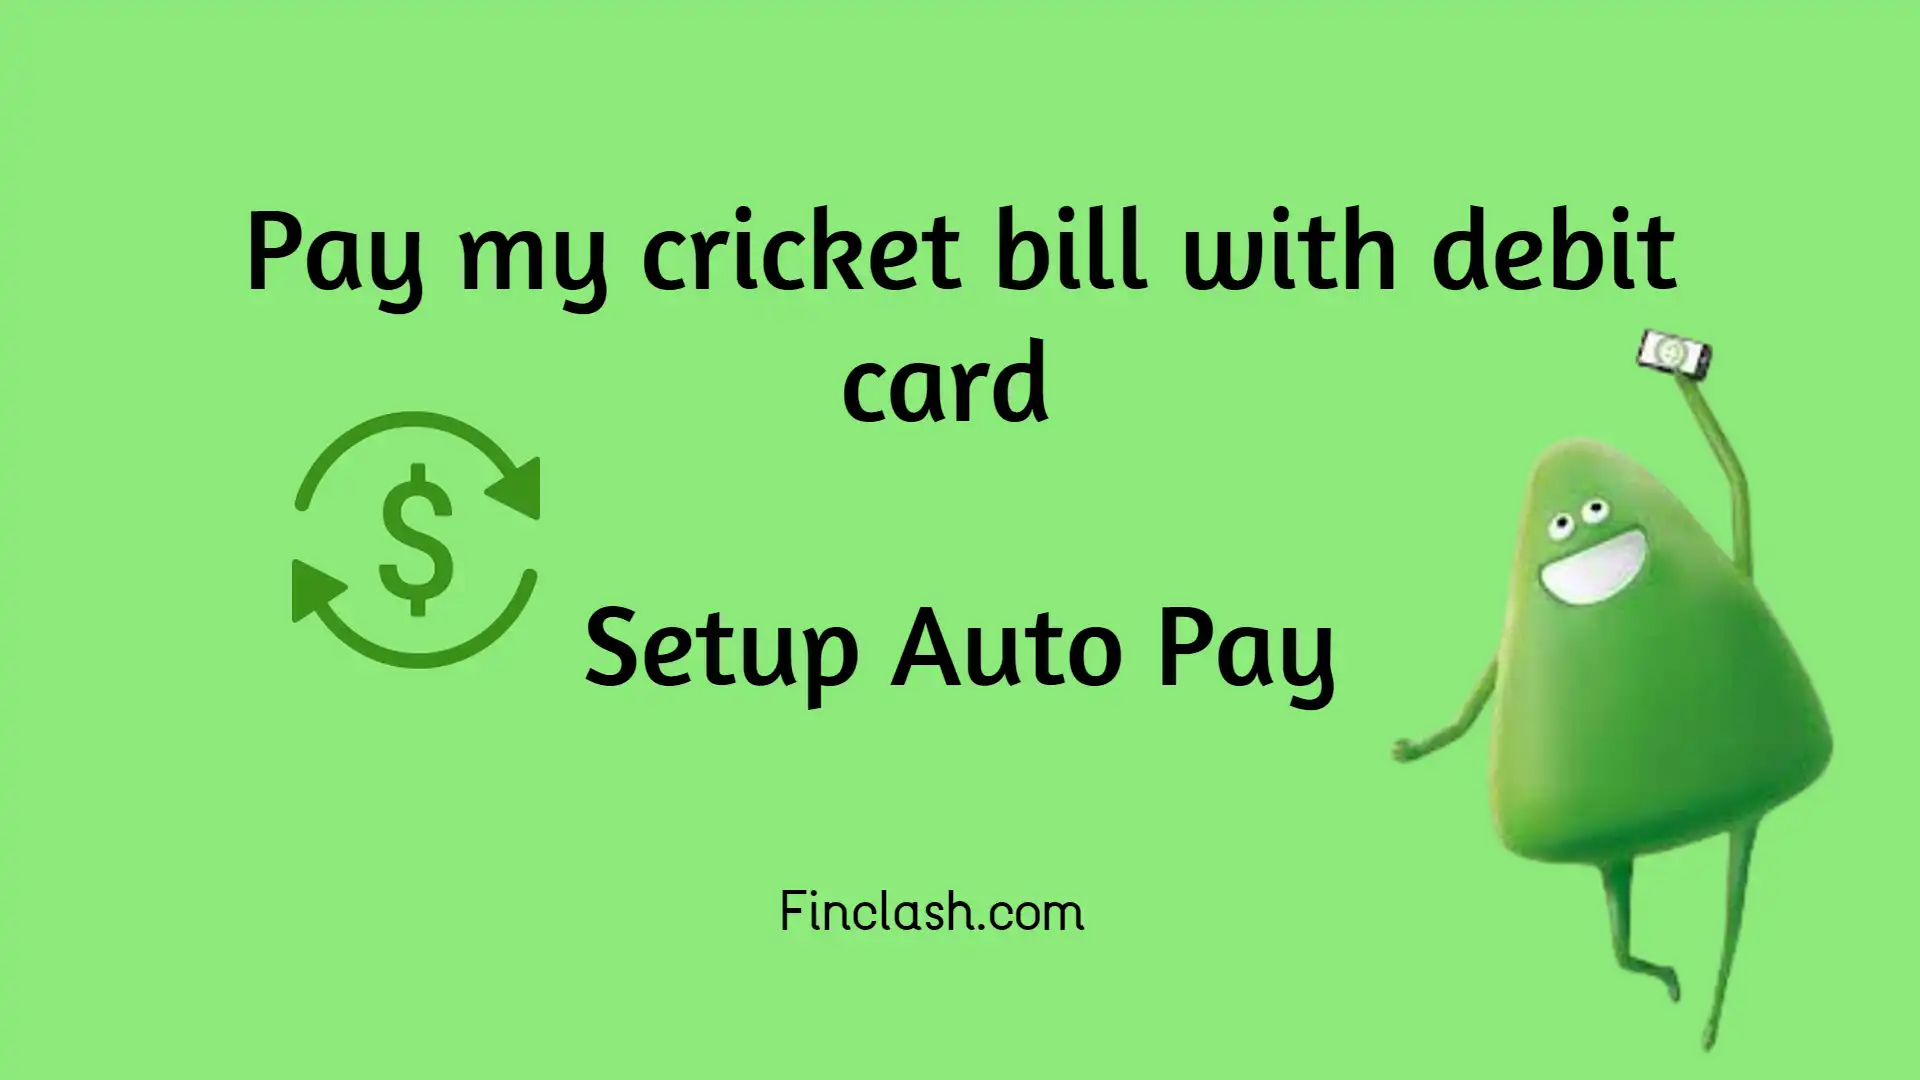 Pay My Cricket Bill with Debit Card: Setup Auto Pay